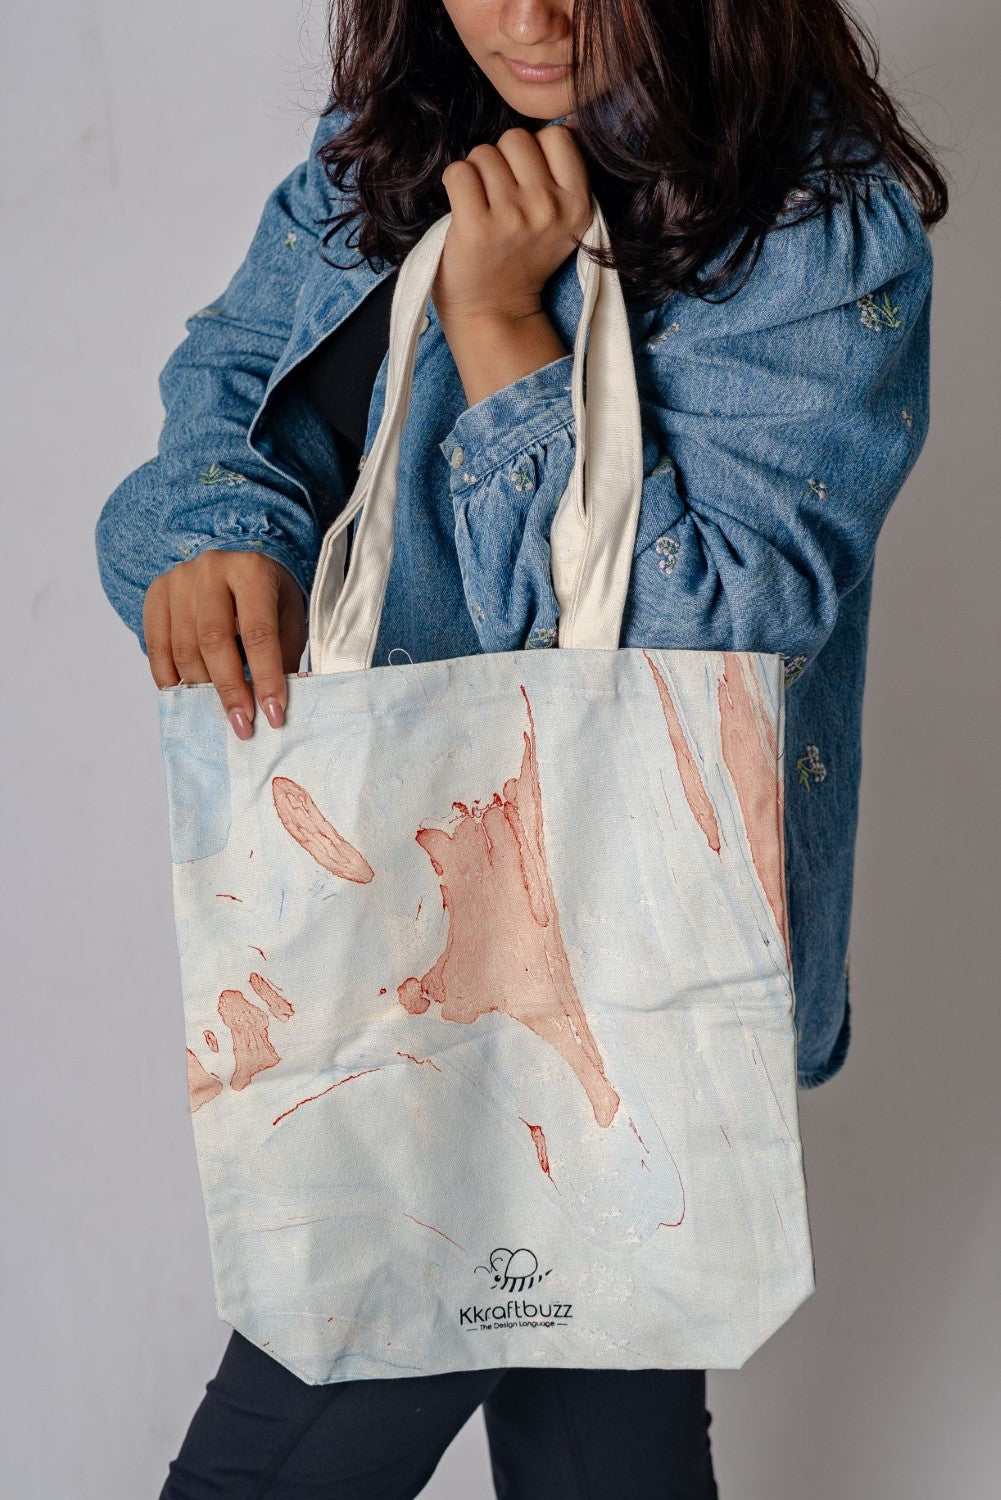 Blue & red cotton tote bag